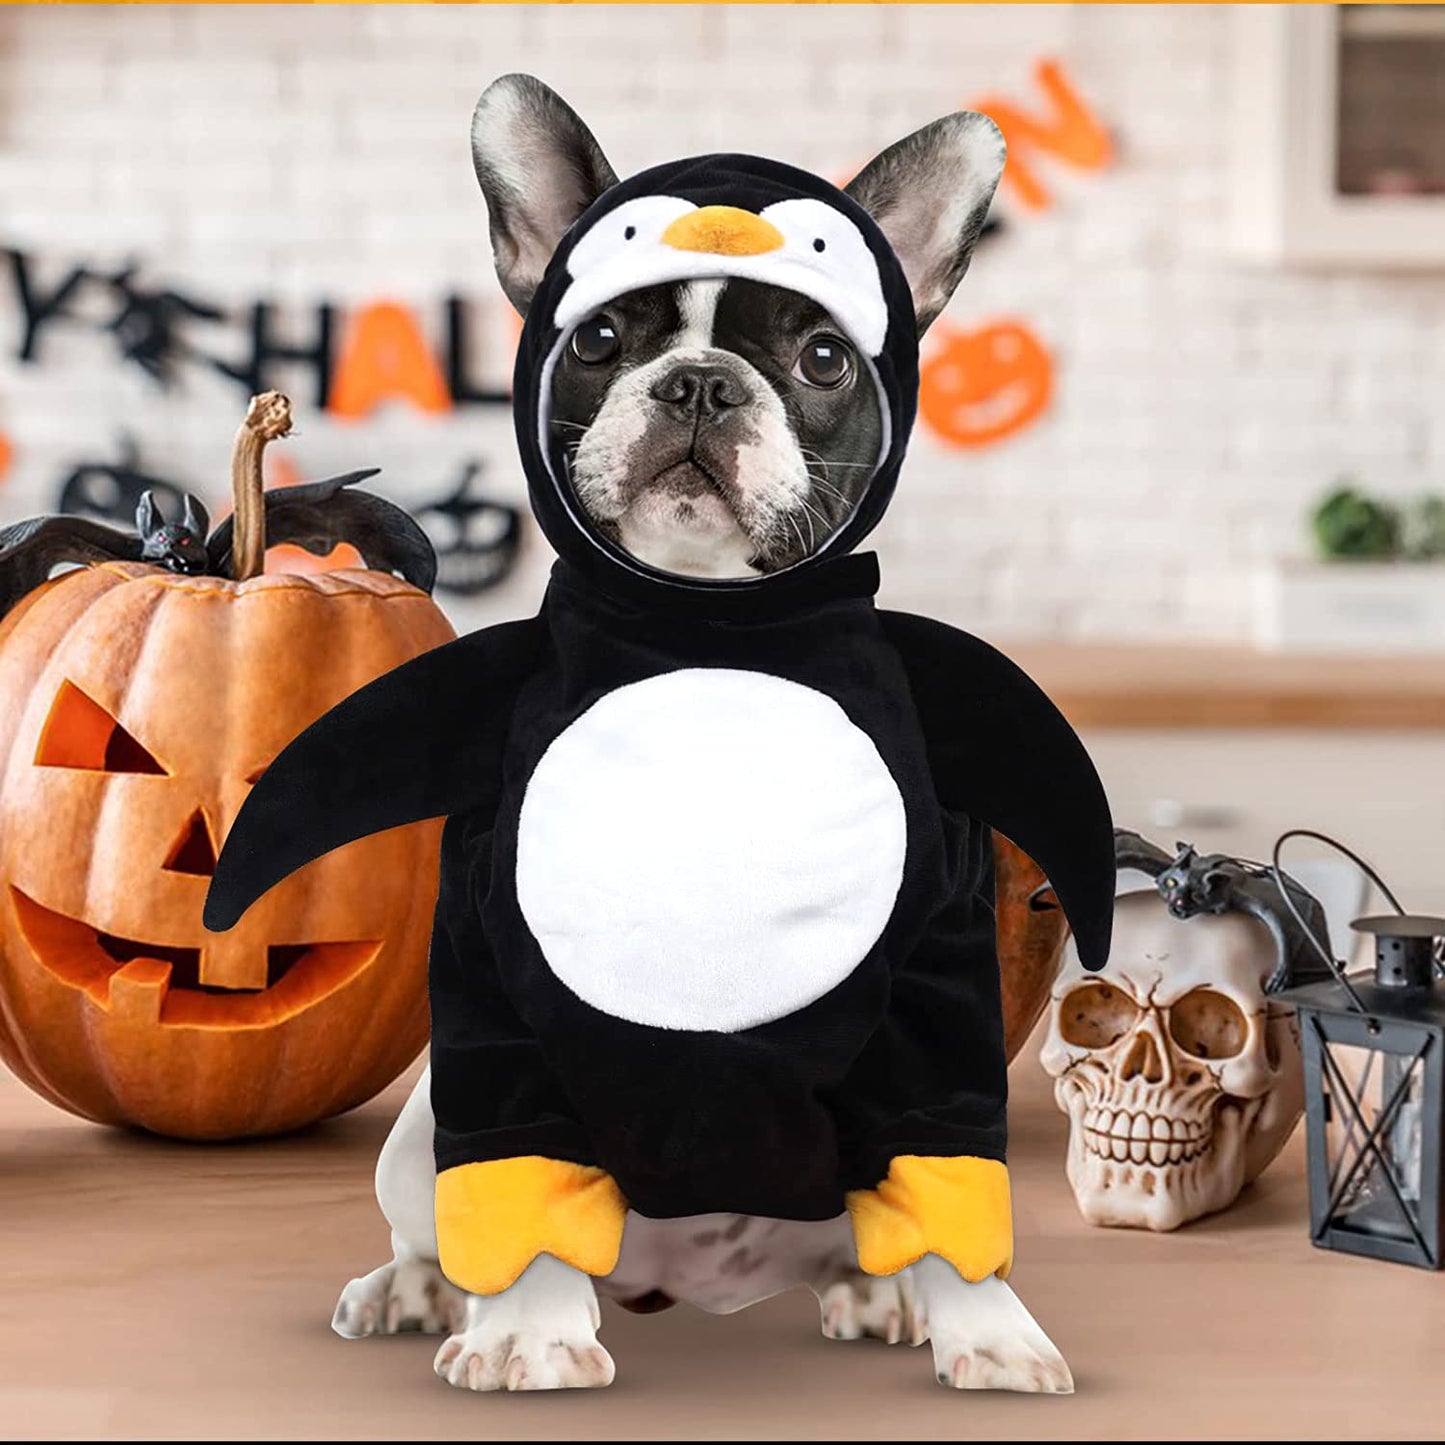 Cyeollo Dog Costume Cute Penguin Dog Cosplay Puppy Funny Halloween Costumes Party Special Clothes for Small Dogs